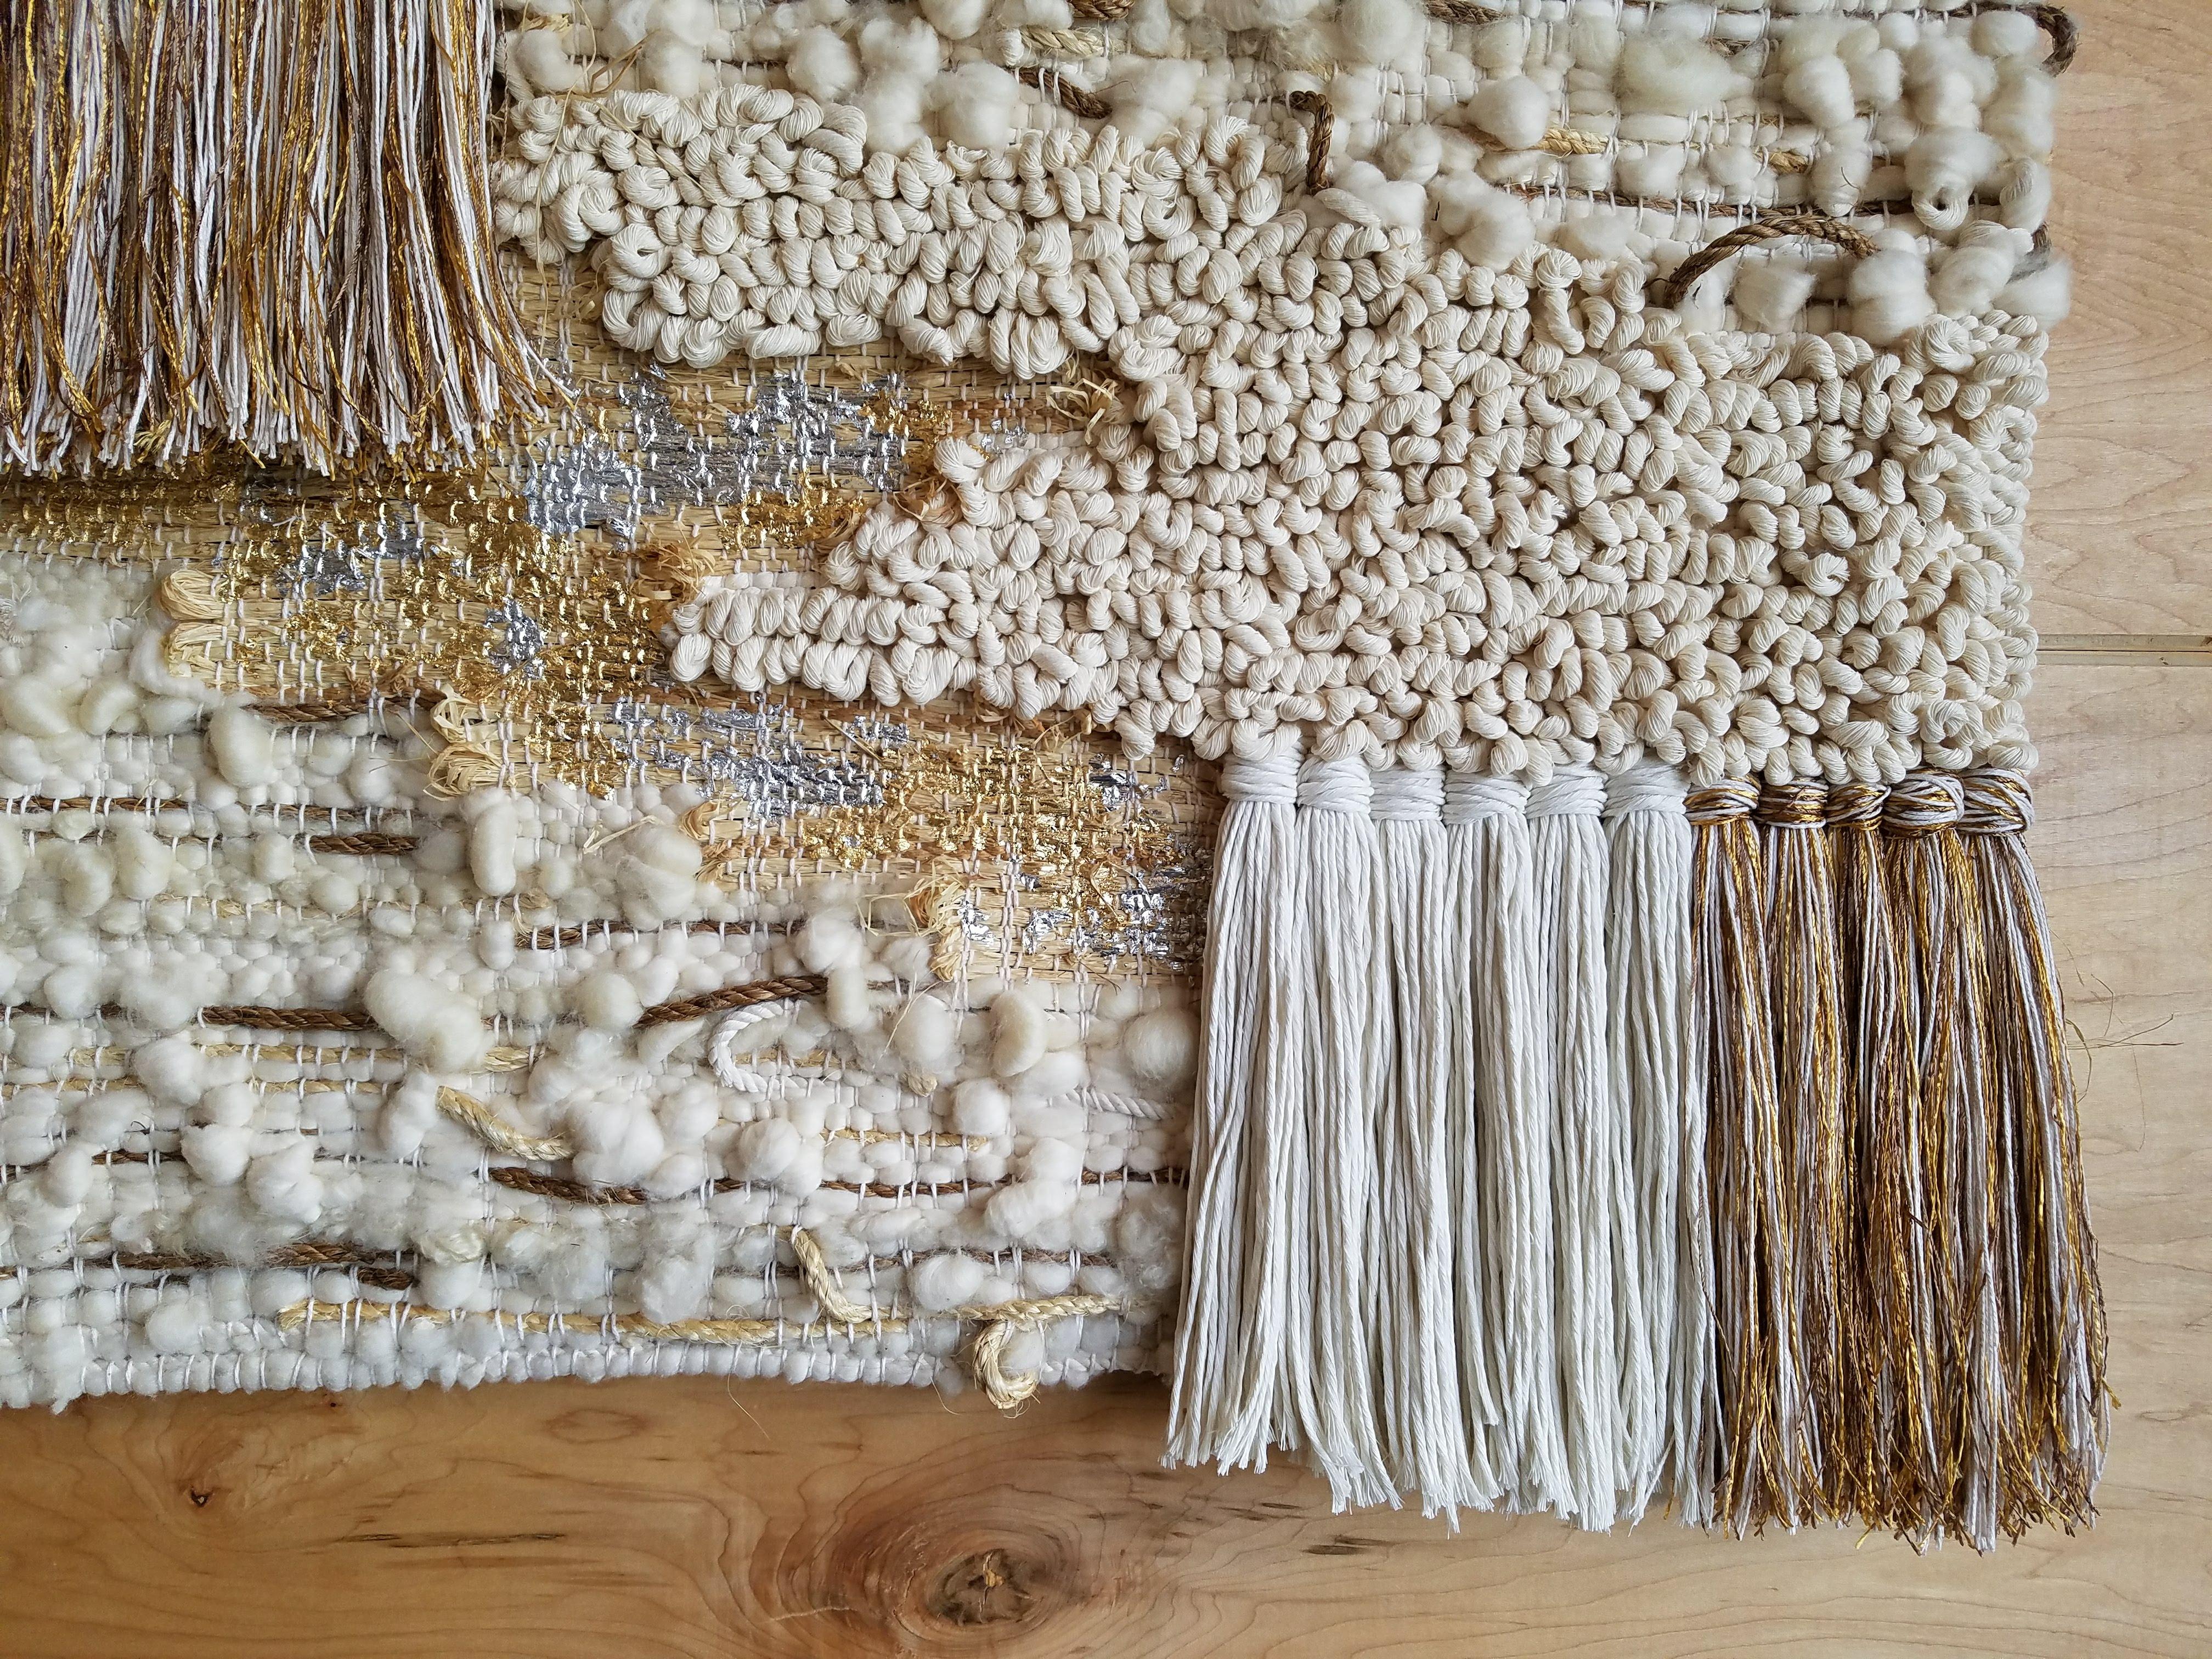 American Small Neutral Fiber Art Weaving with Rope by All Roads For Sale